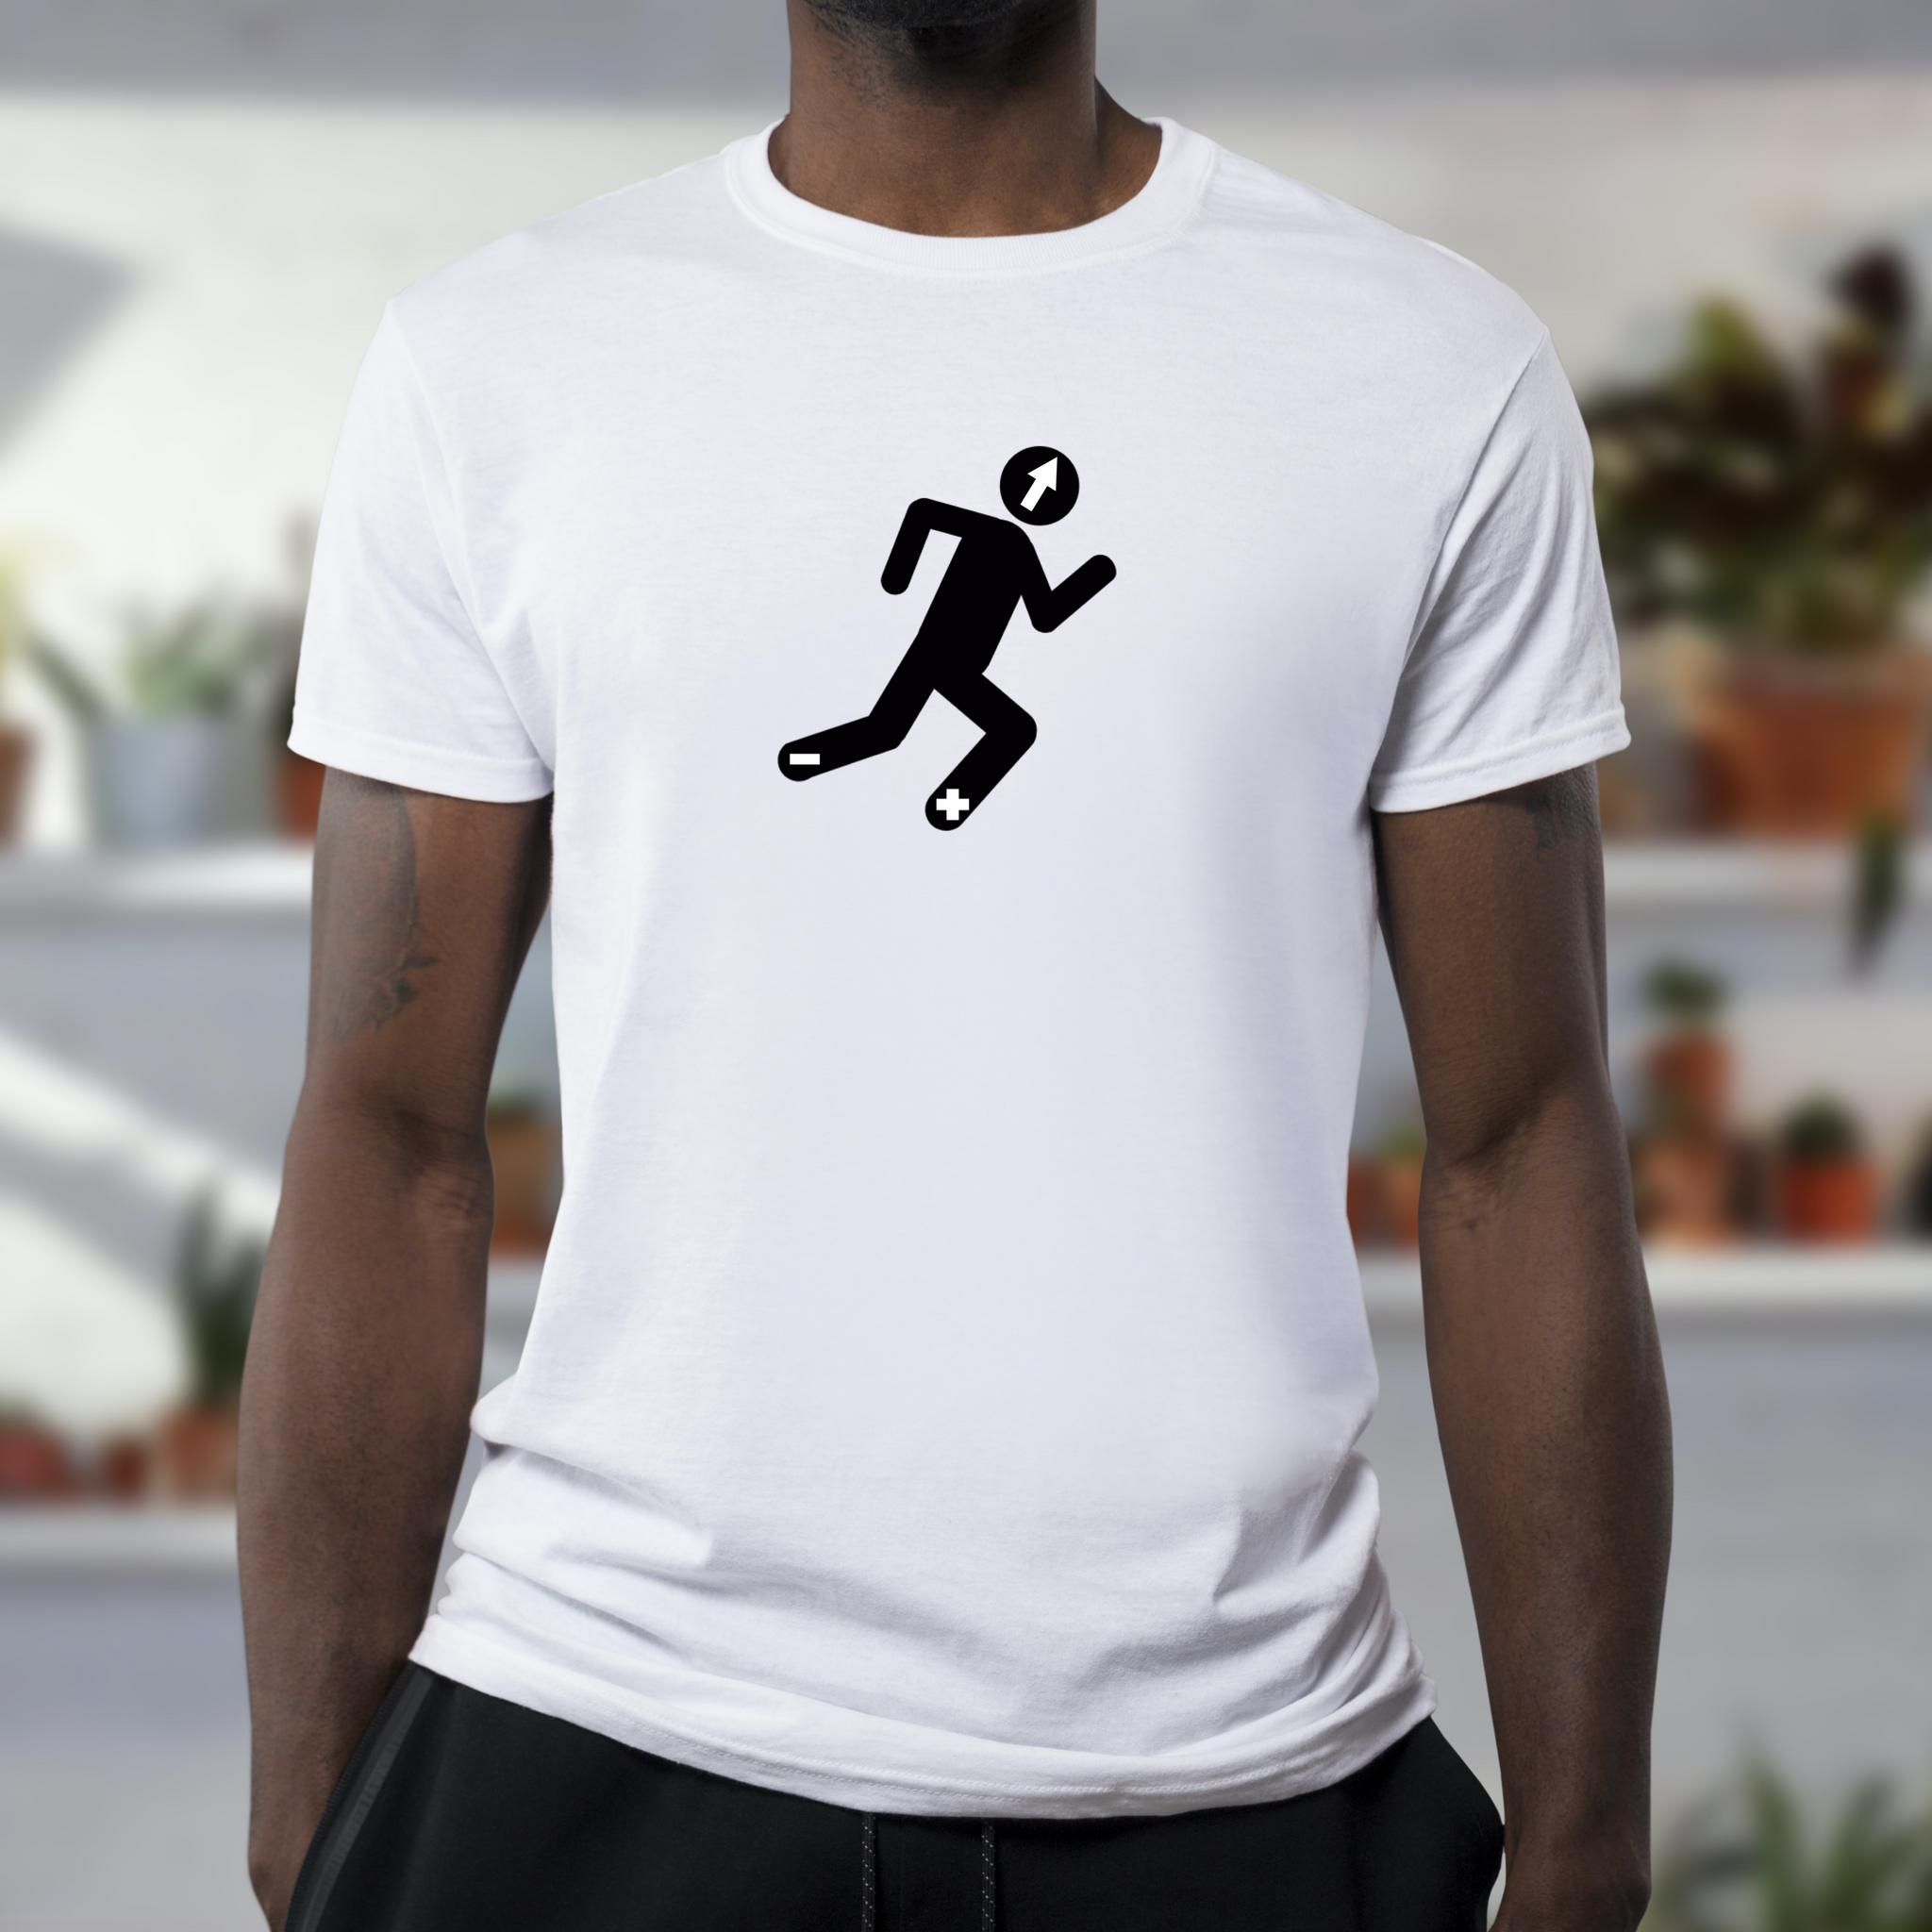 The Running One Adult T-shirt